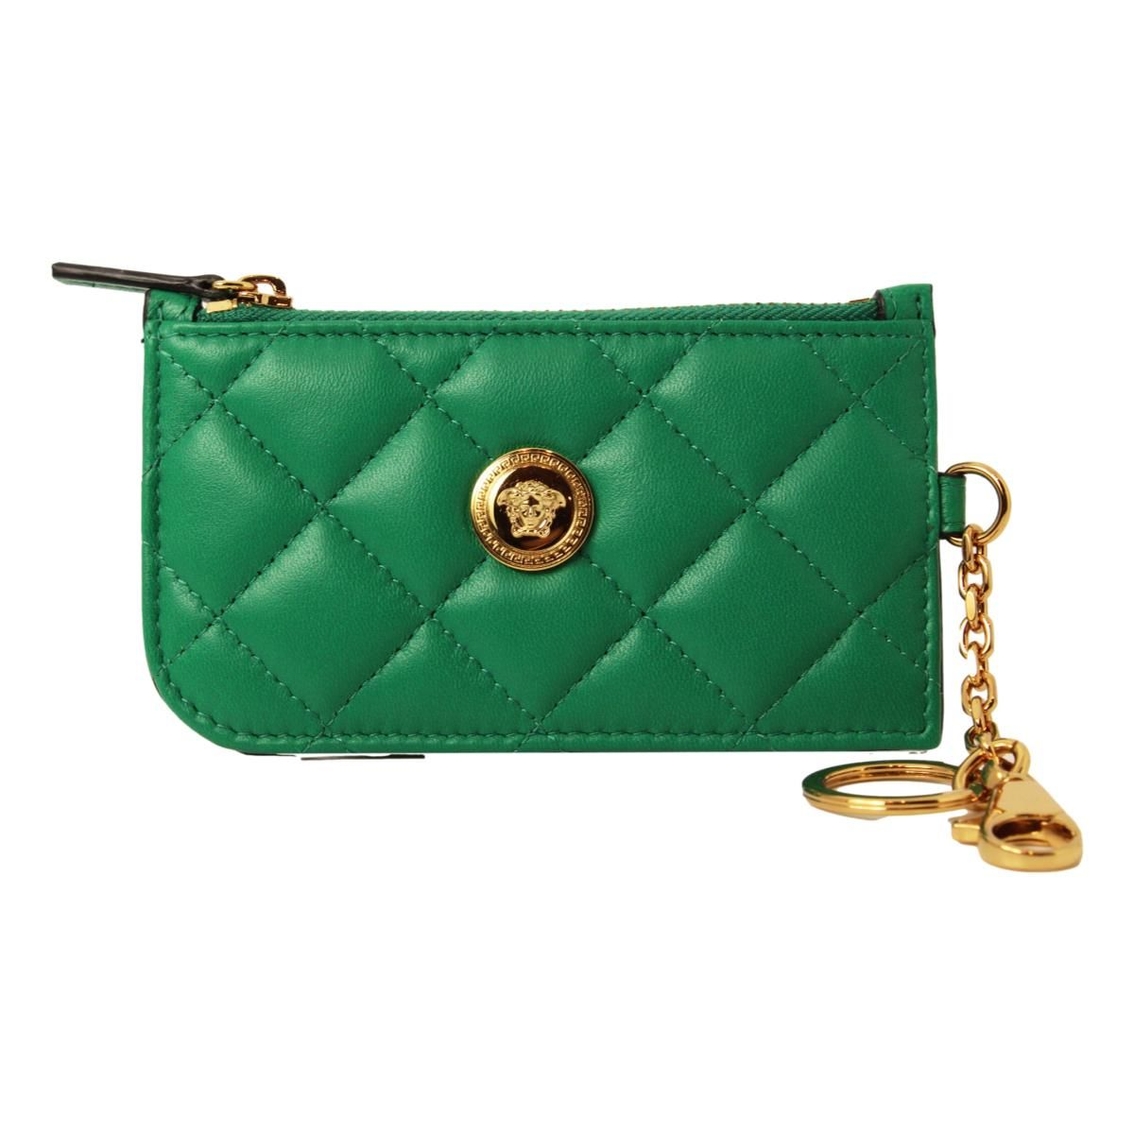 Versace Medusa Quilted Green Lambskin Leather Card Case Keychain, Handbags, Clothing & Accessories